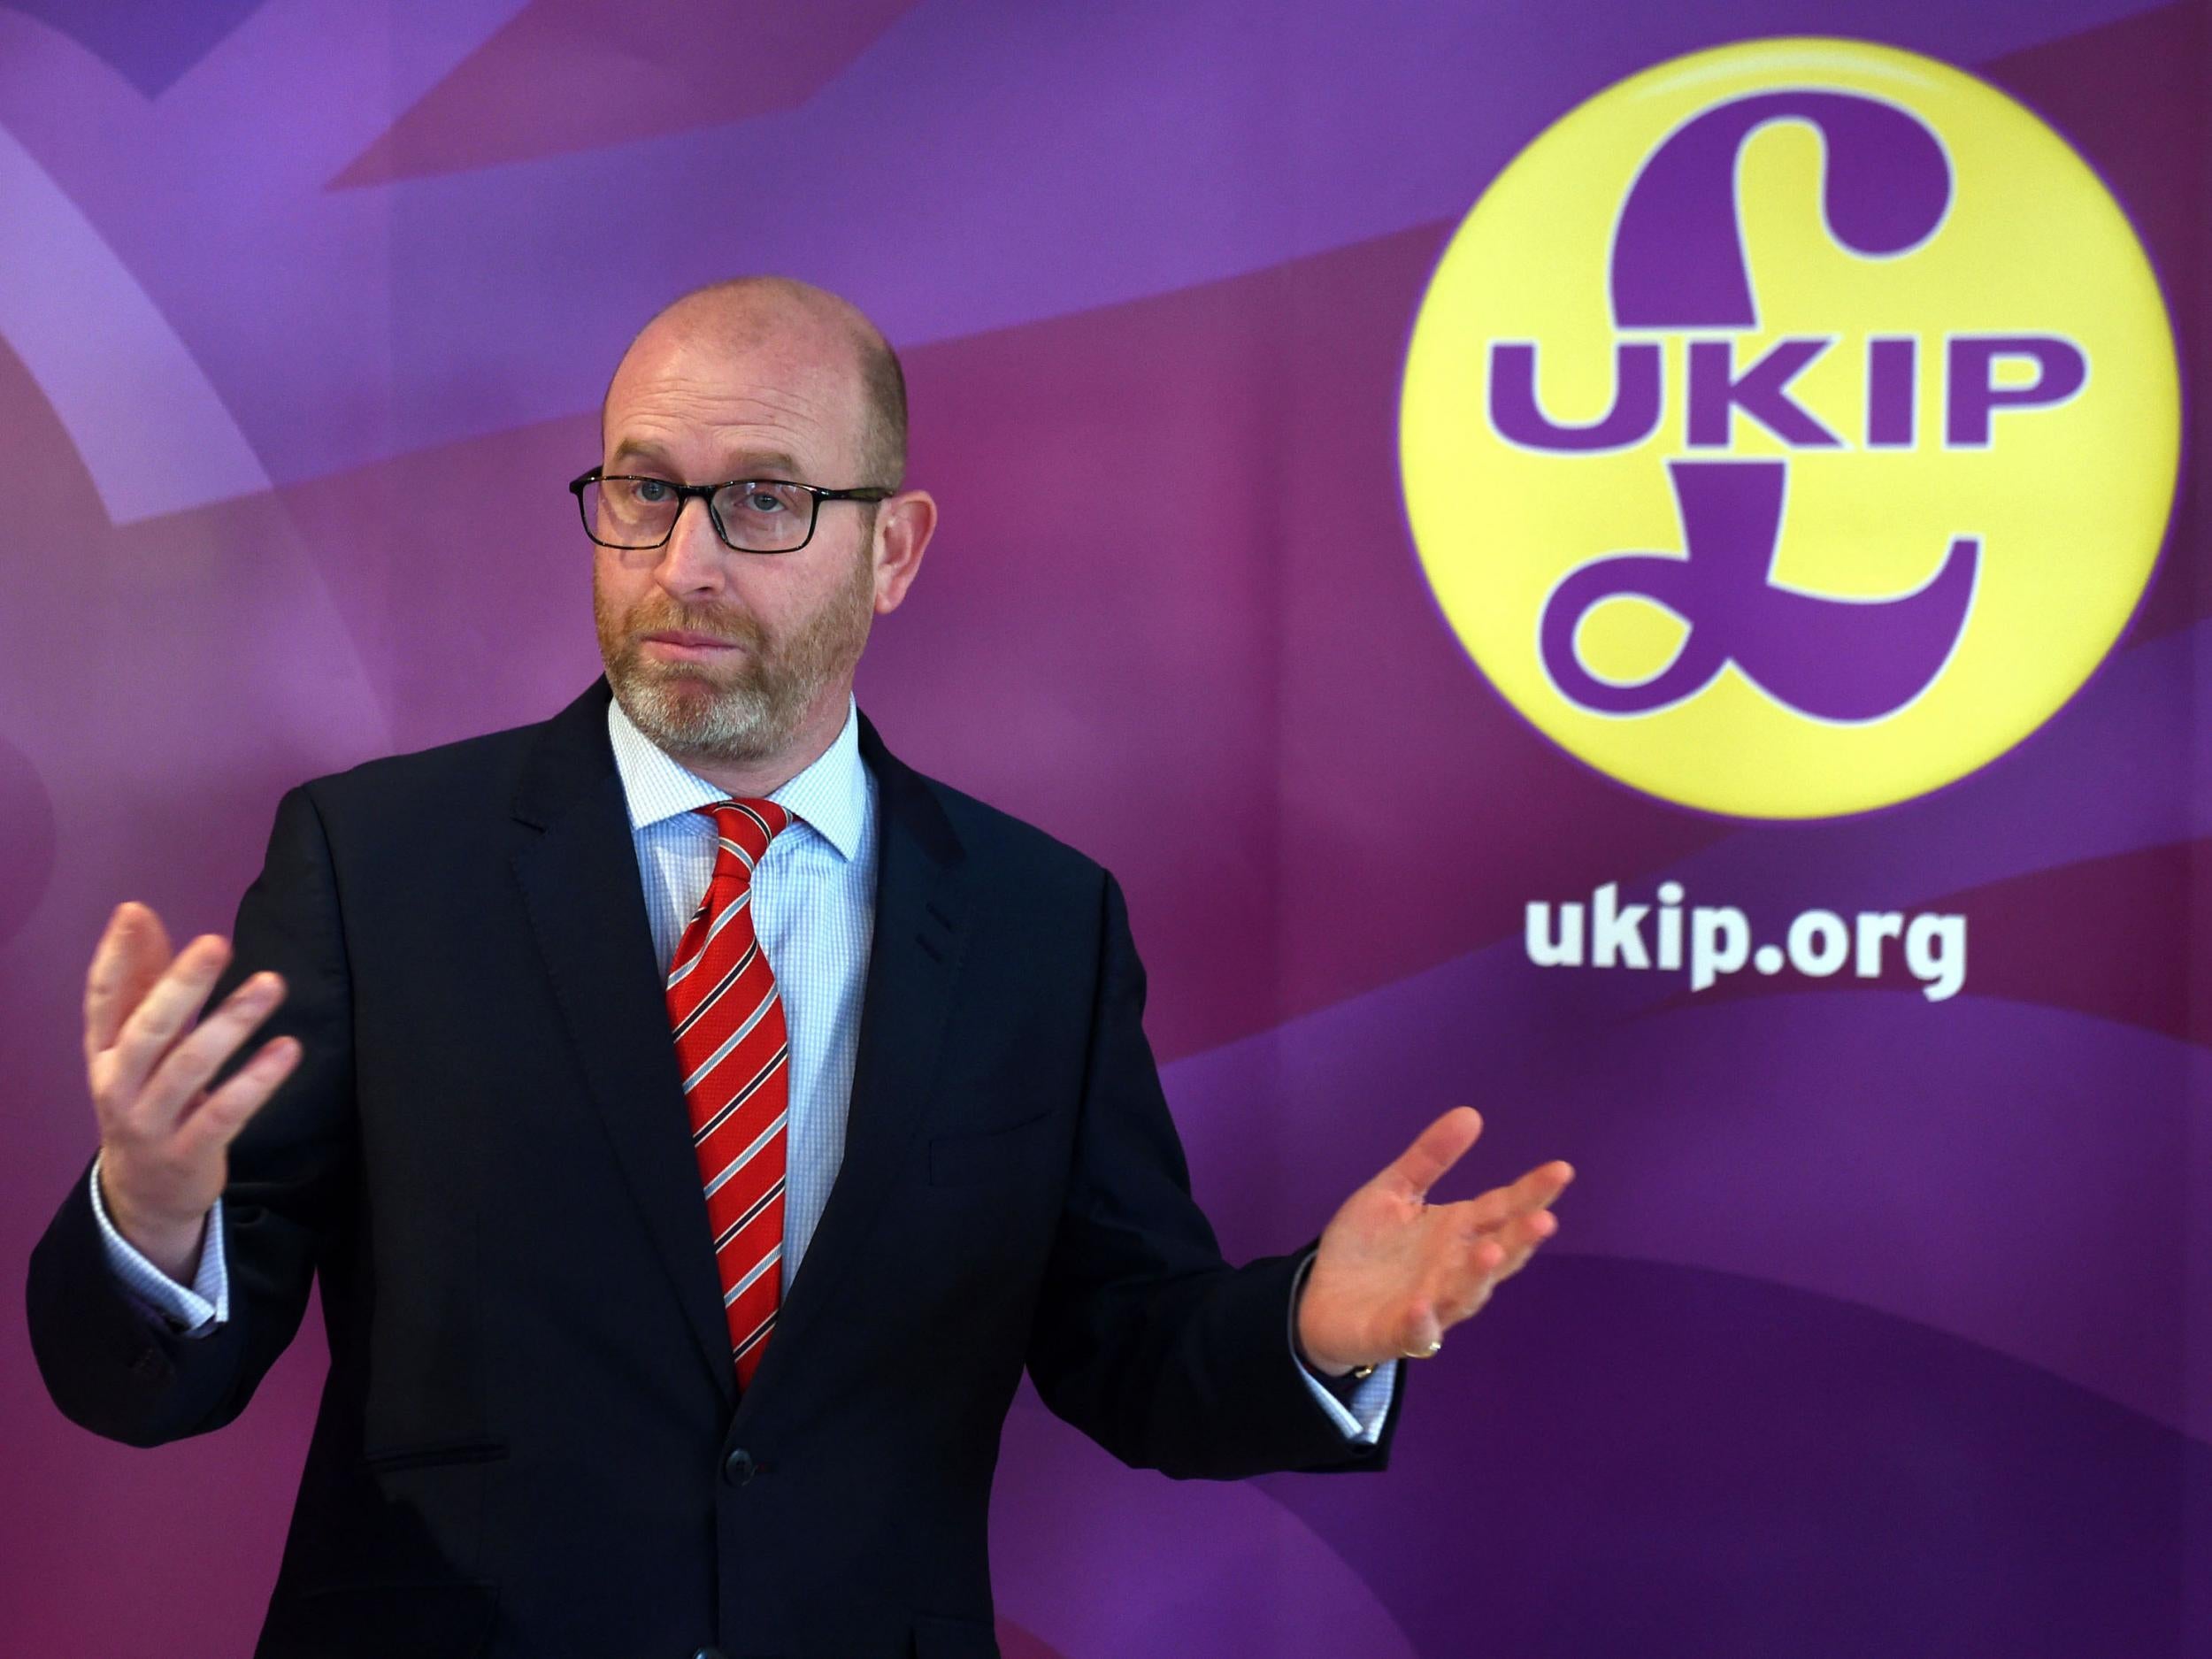 Mr Nuttall, Ukip’s candidate in the upcoming Stoke by-election, has faced a number of damaging allegations about the accuracy of statements on his website